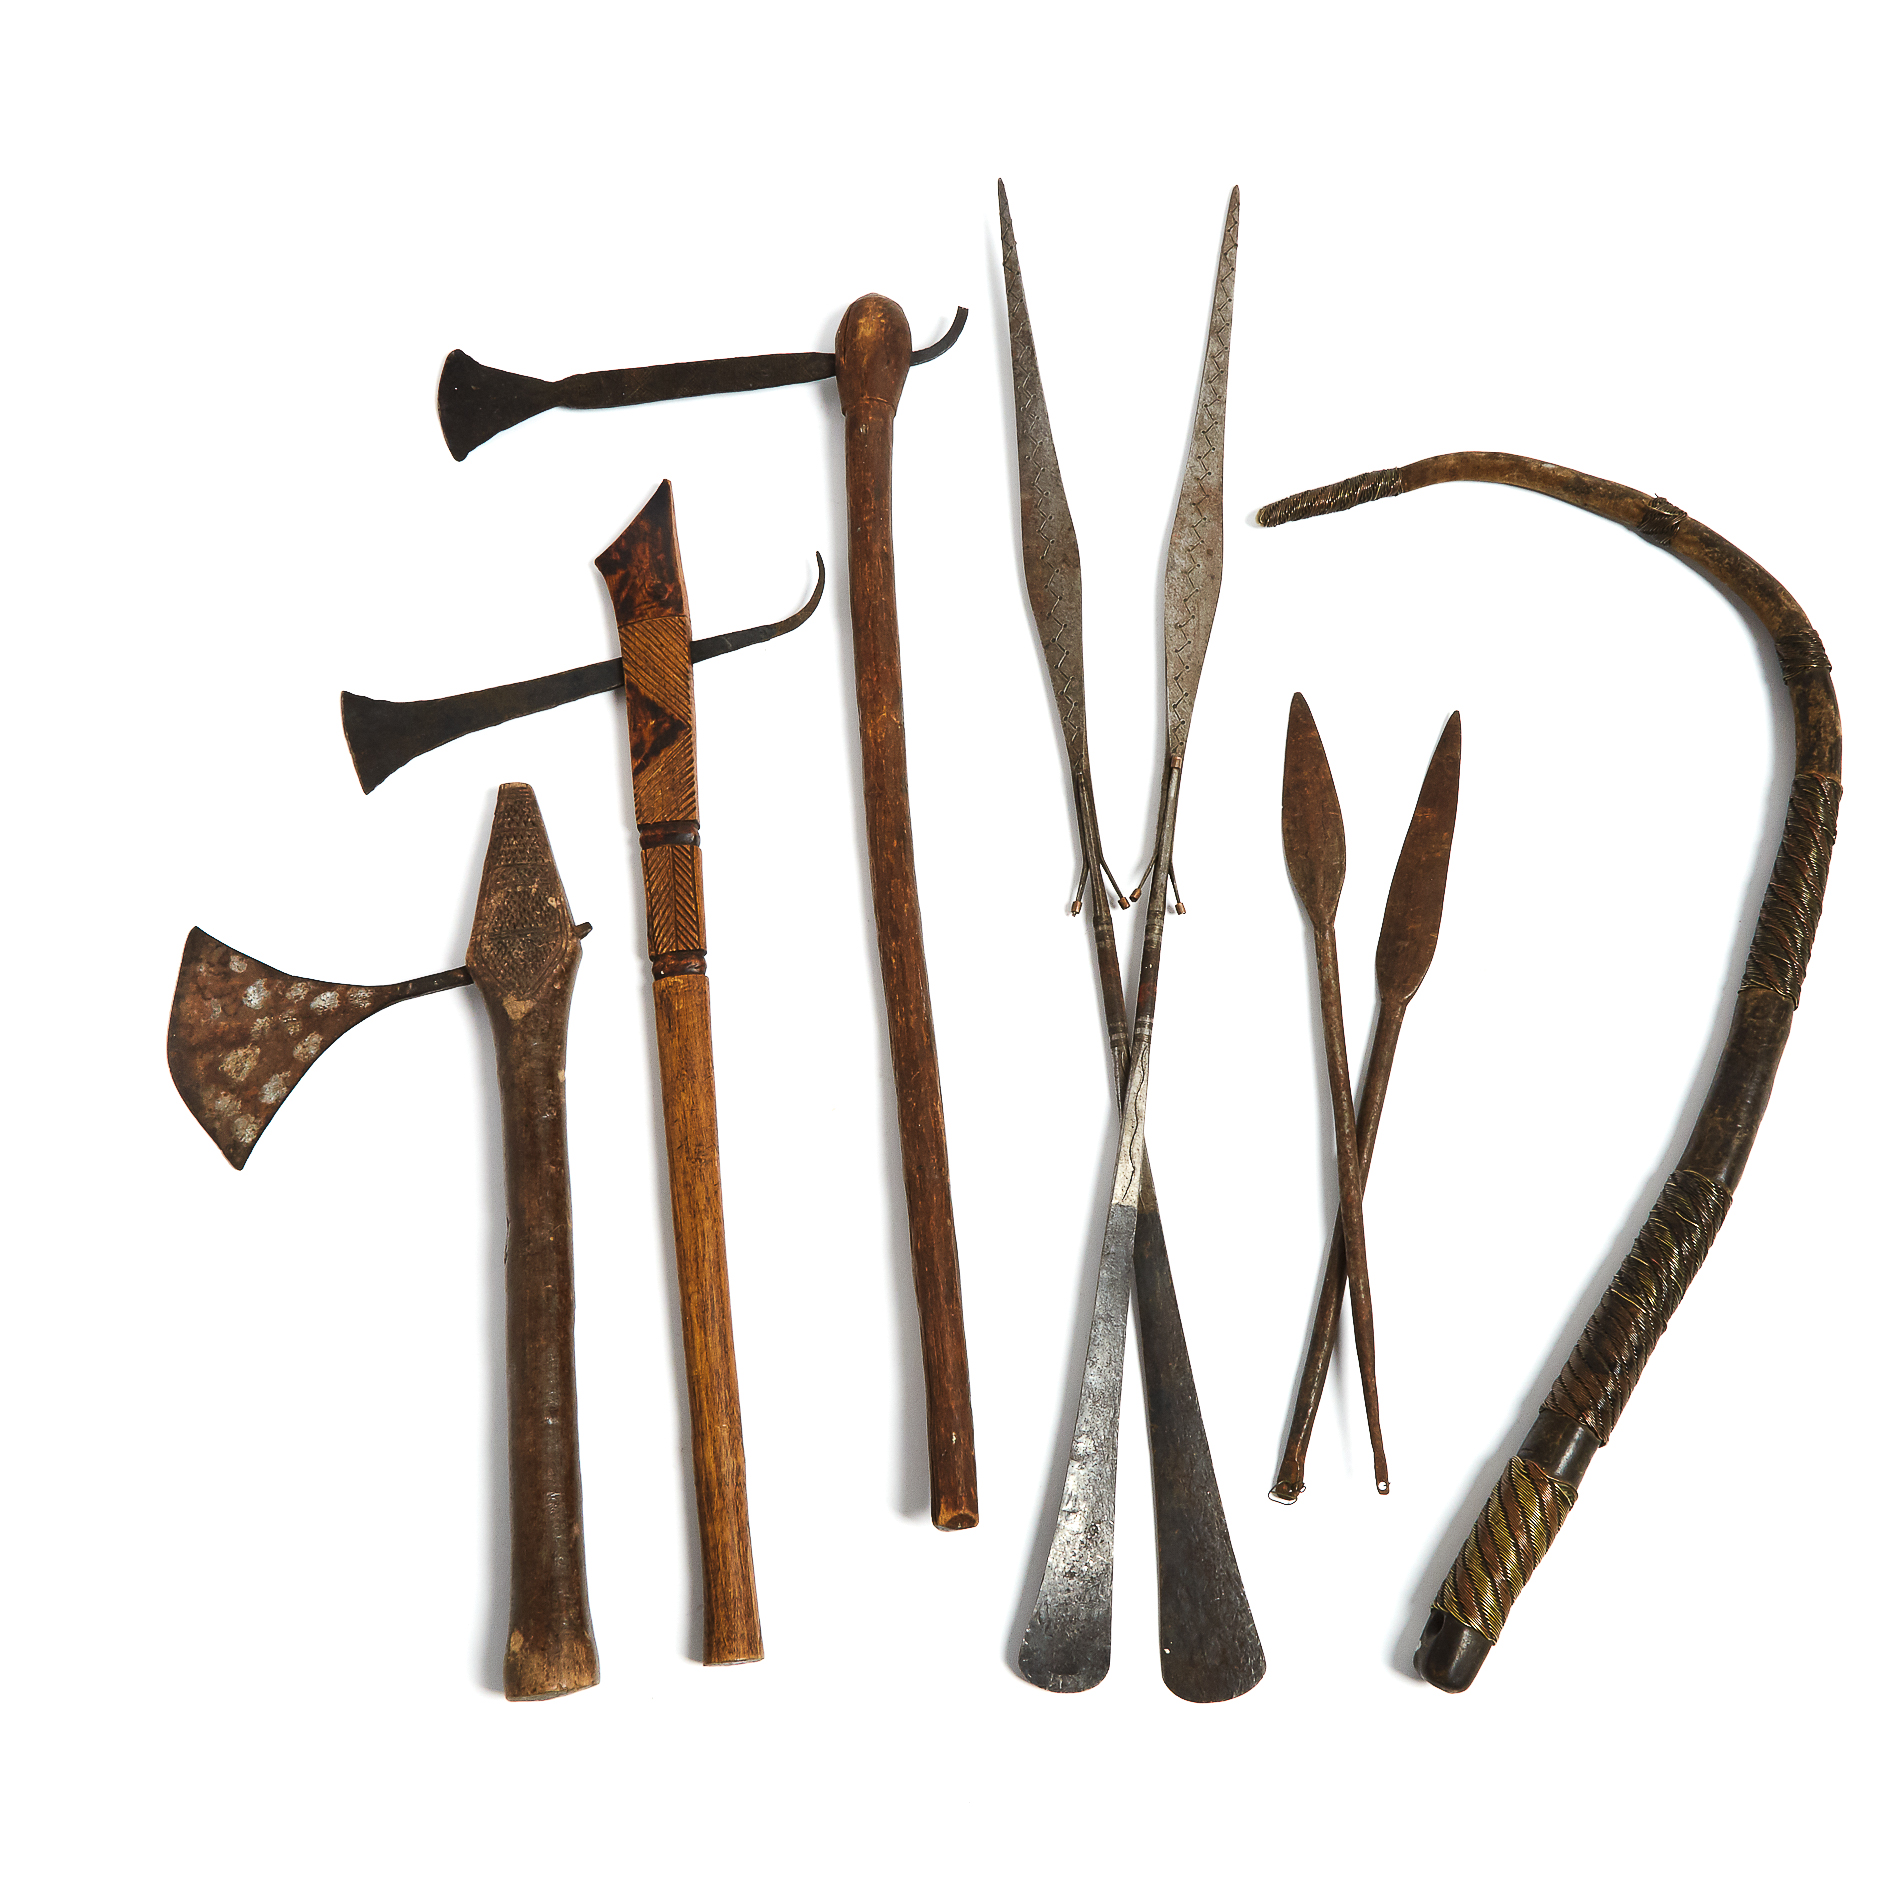 Group of Seven African Edged Weapons